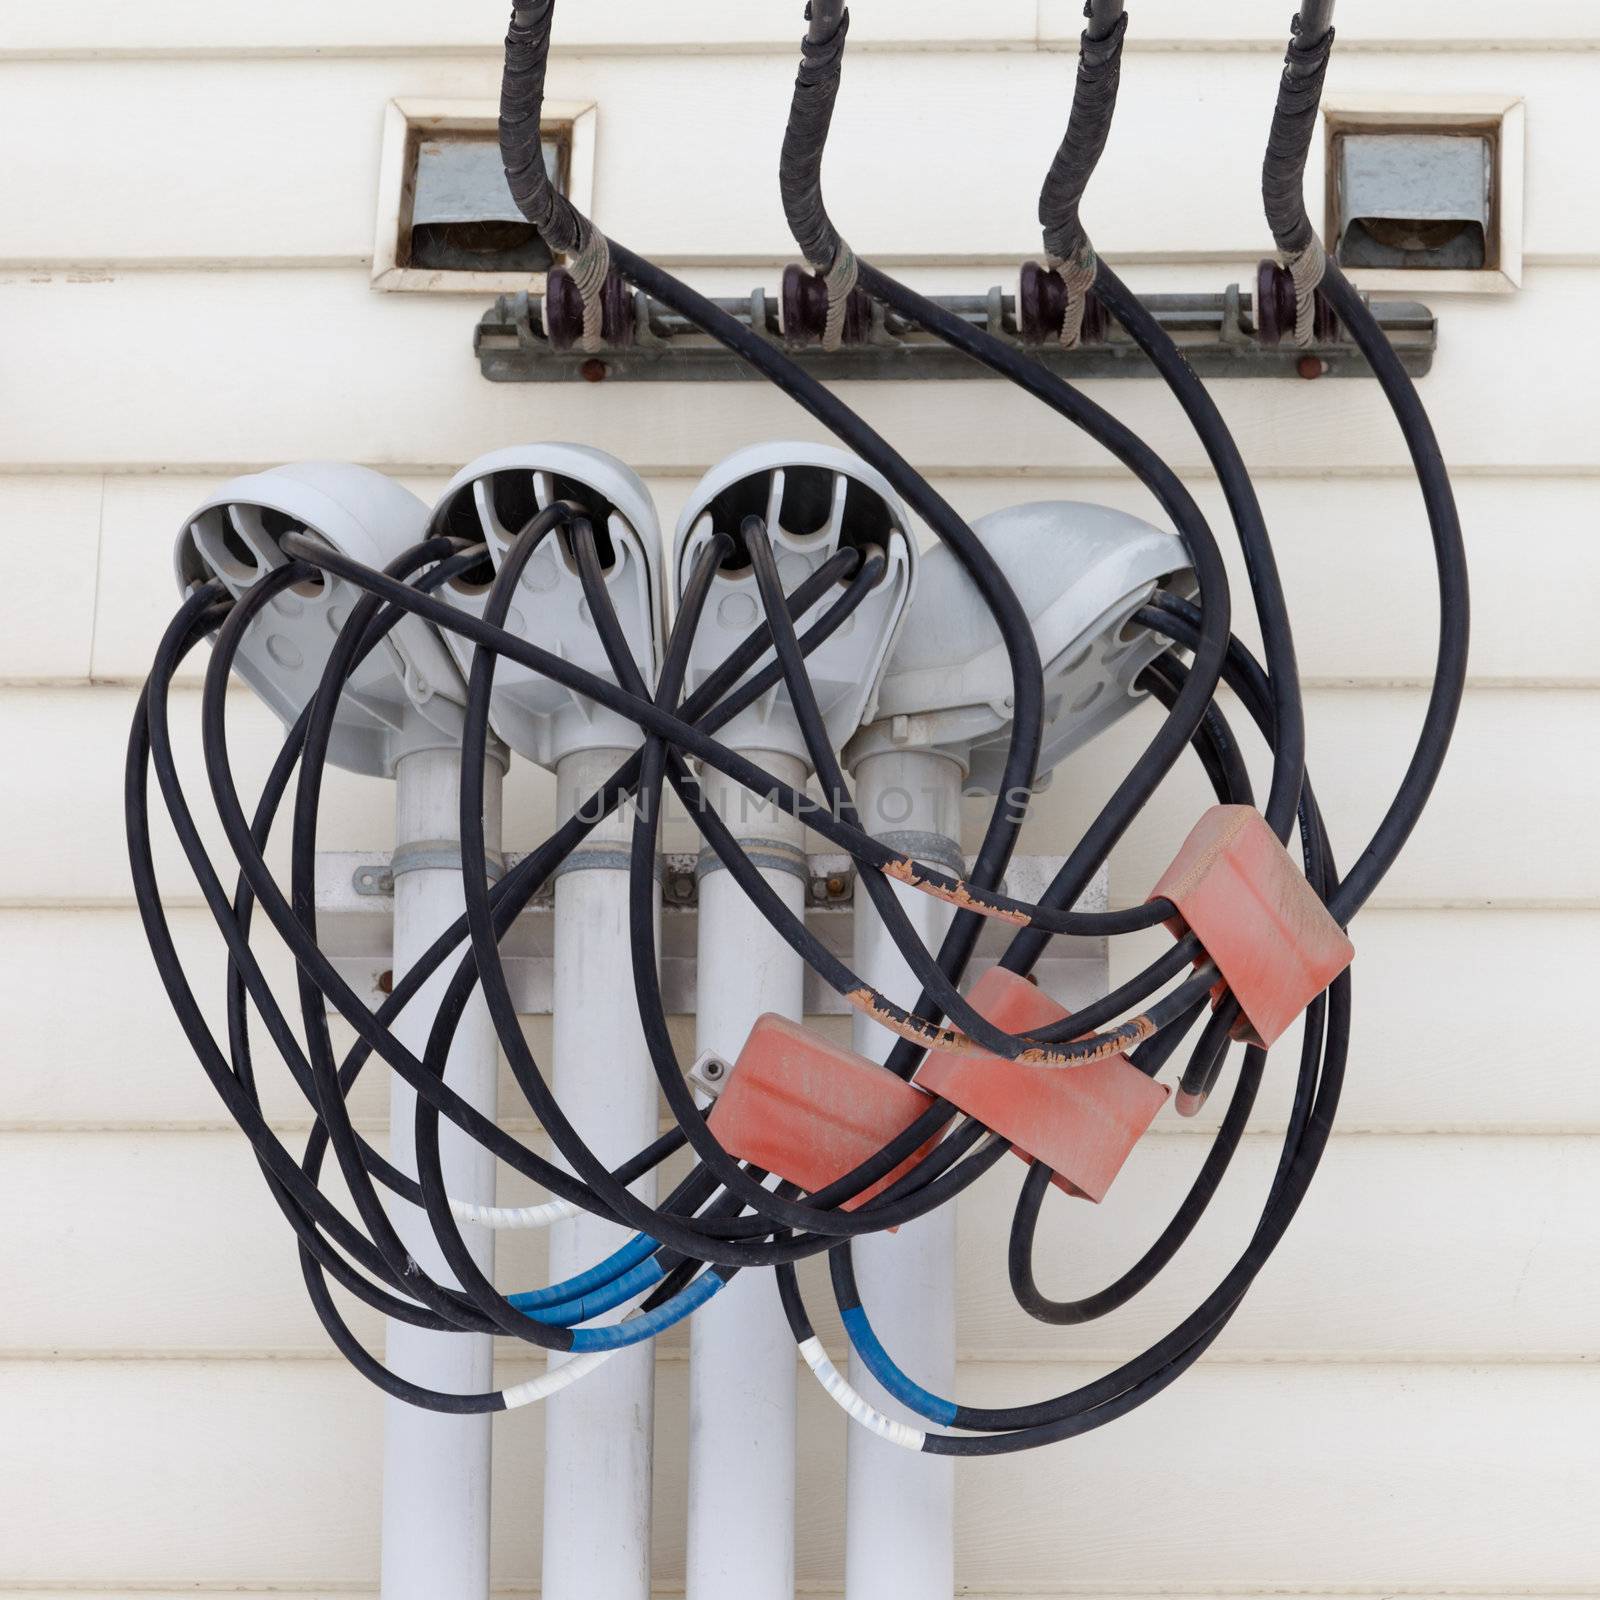 Incoming electricity supply with a complicated junction of wires and connectors on the exterior wall of a building with wooden siding